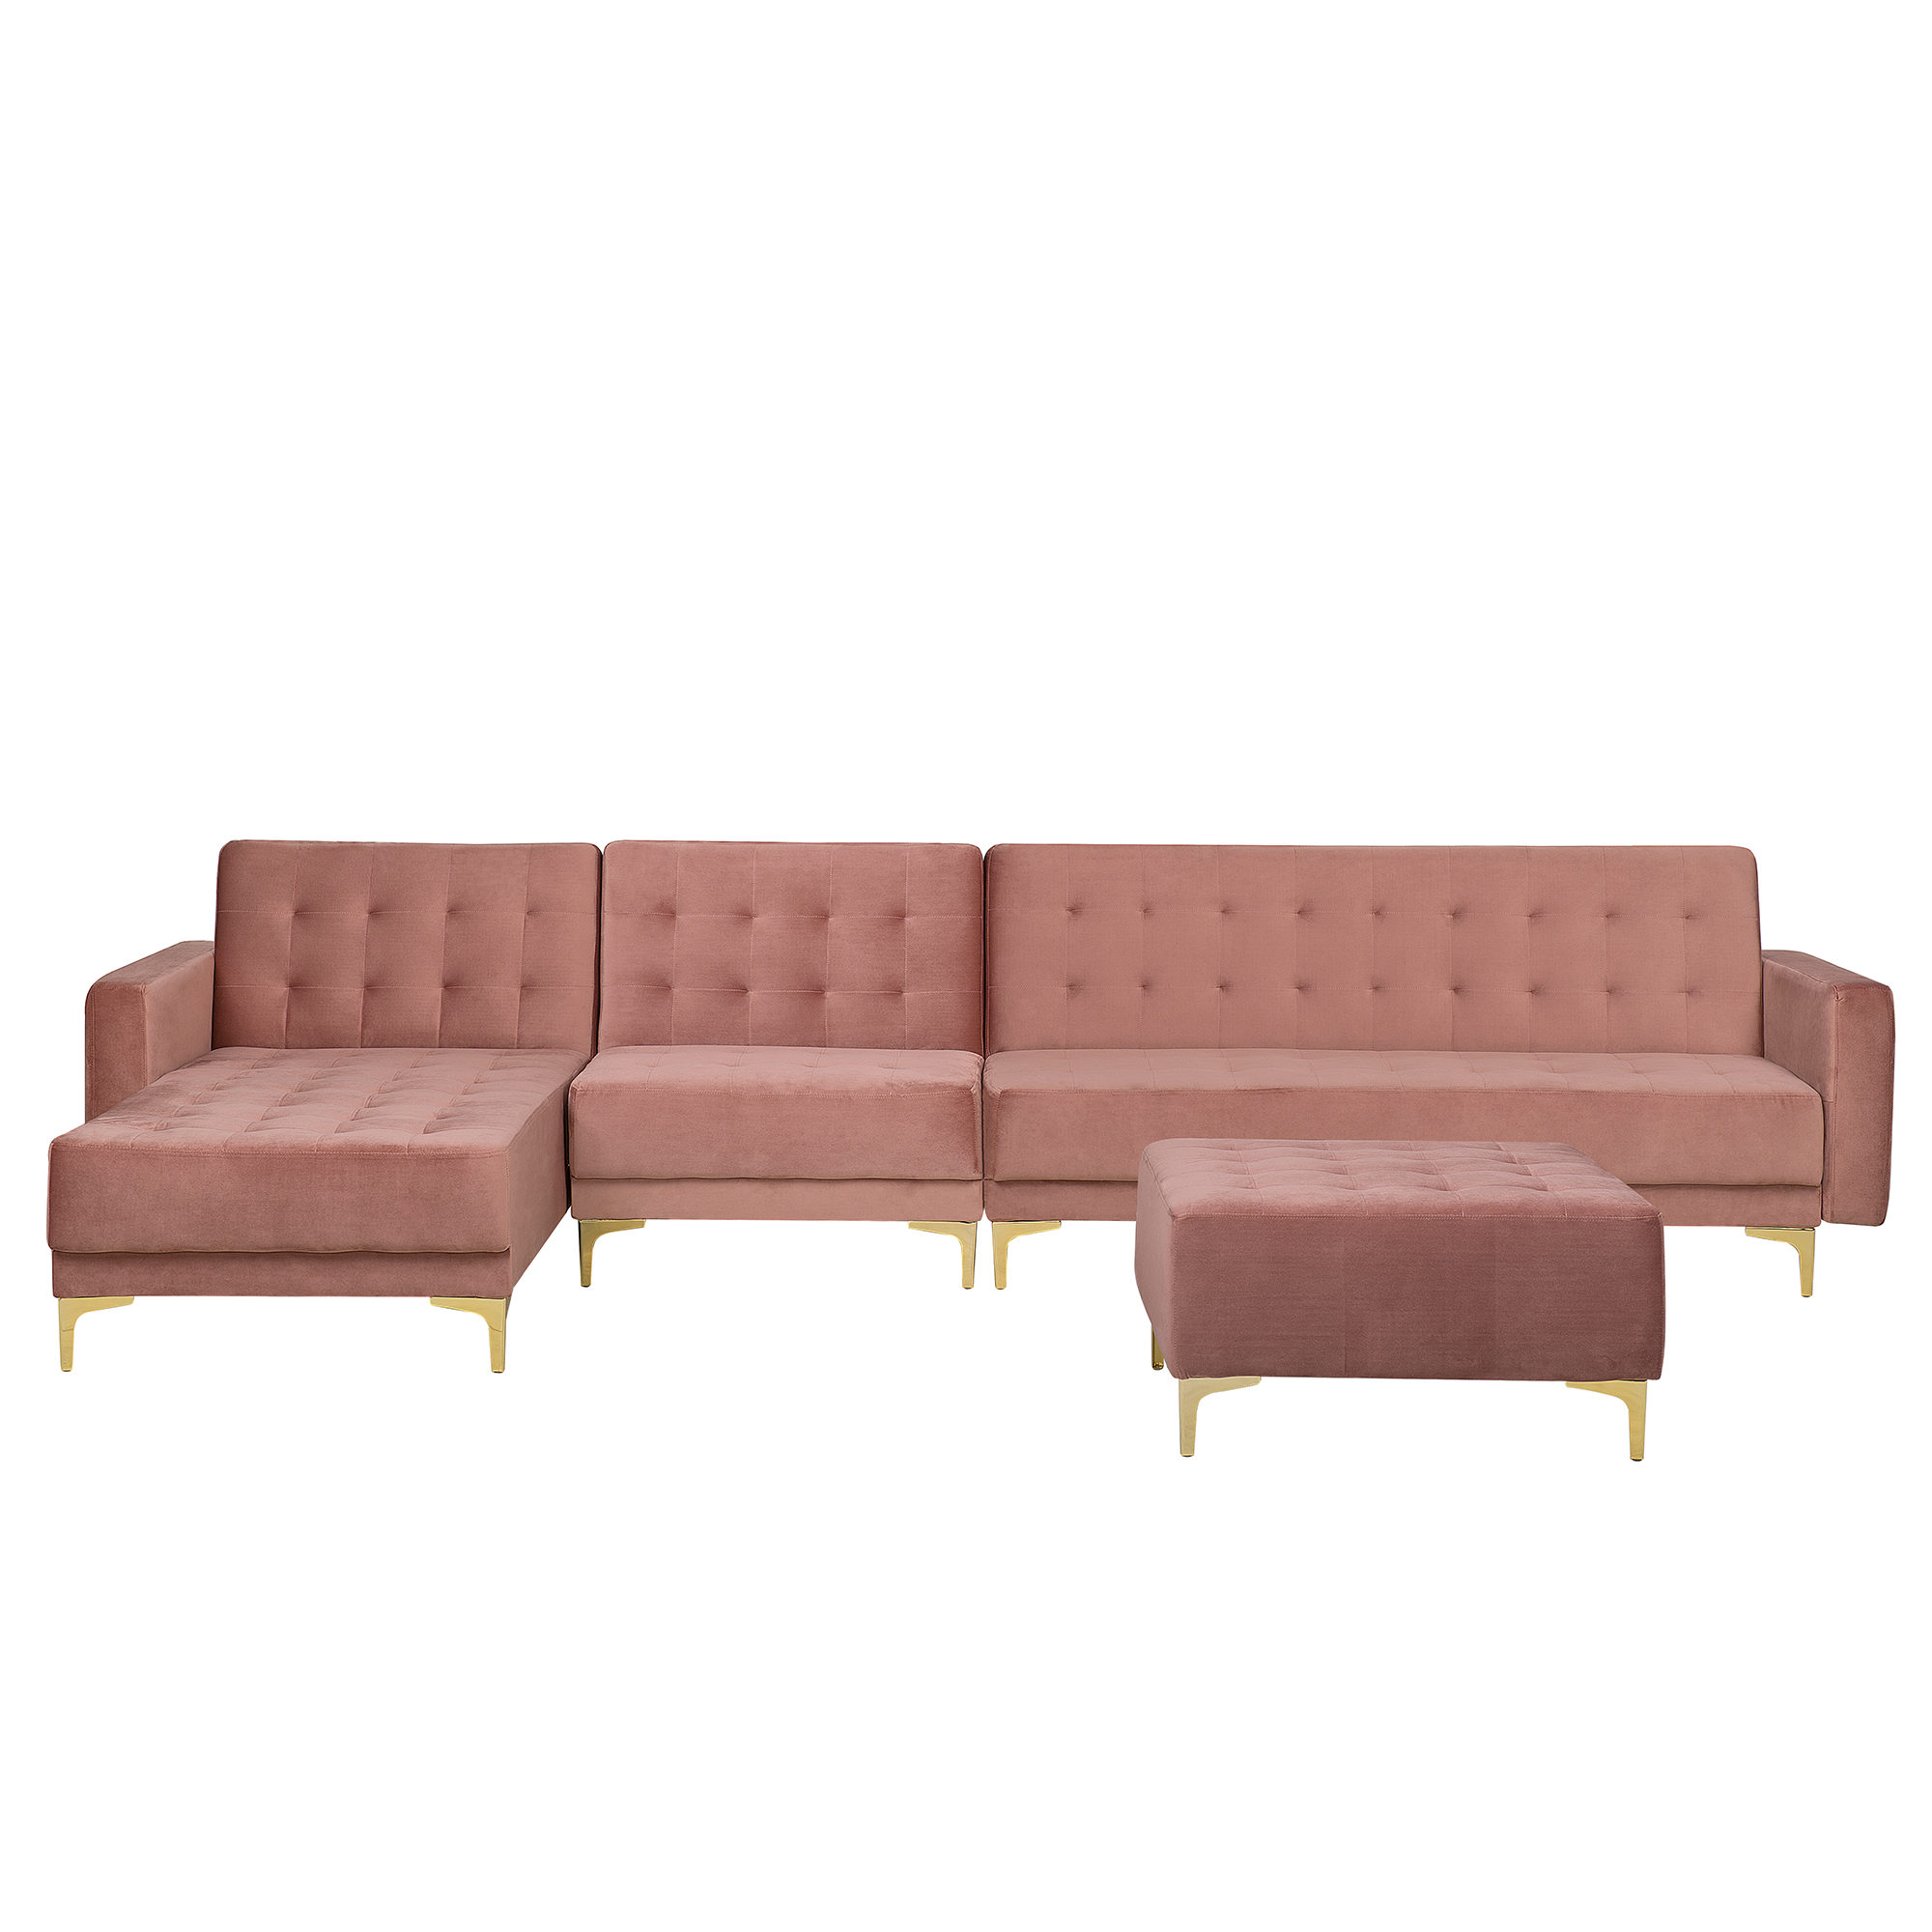 Beliani Corner Sofa Bed Pink Velvet Tufted Fabric Modern L-Shaped Modular 5 Seater with Ottoman Right Hand Chaise Longue